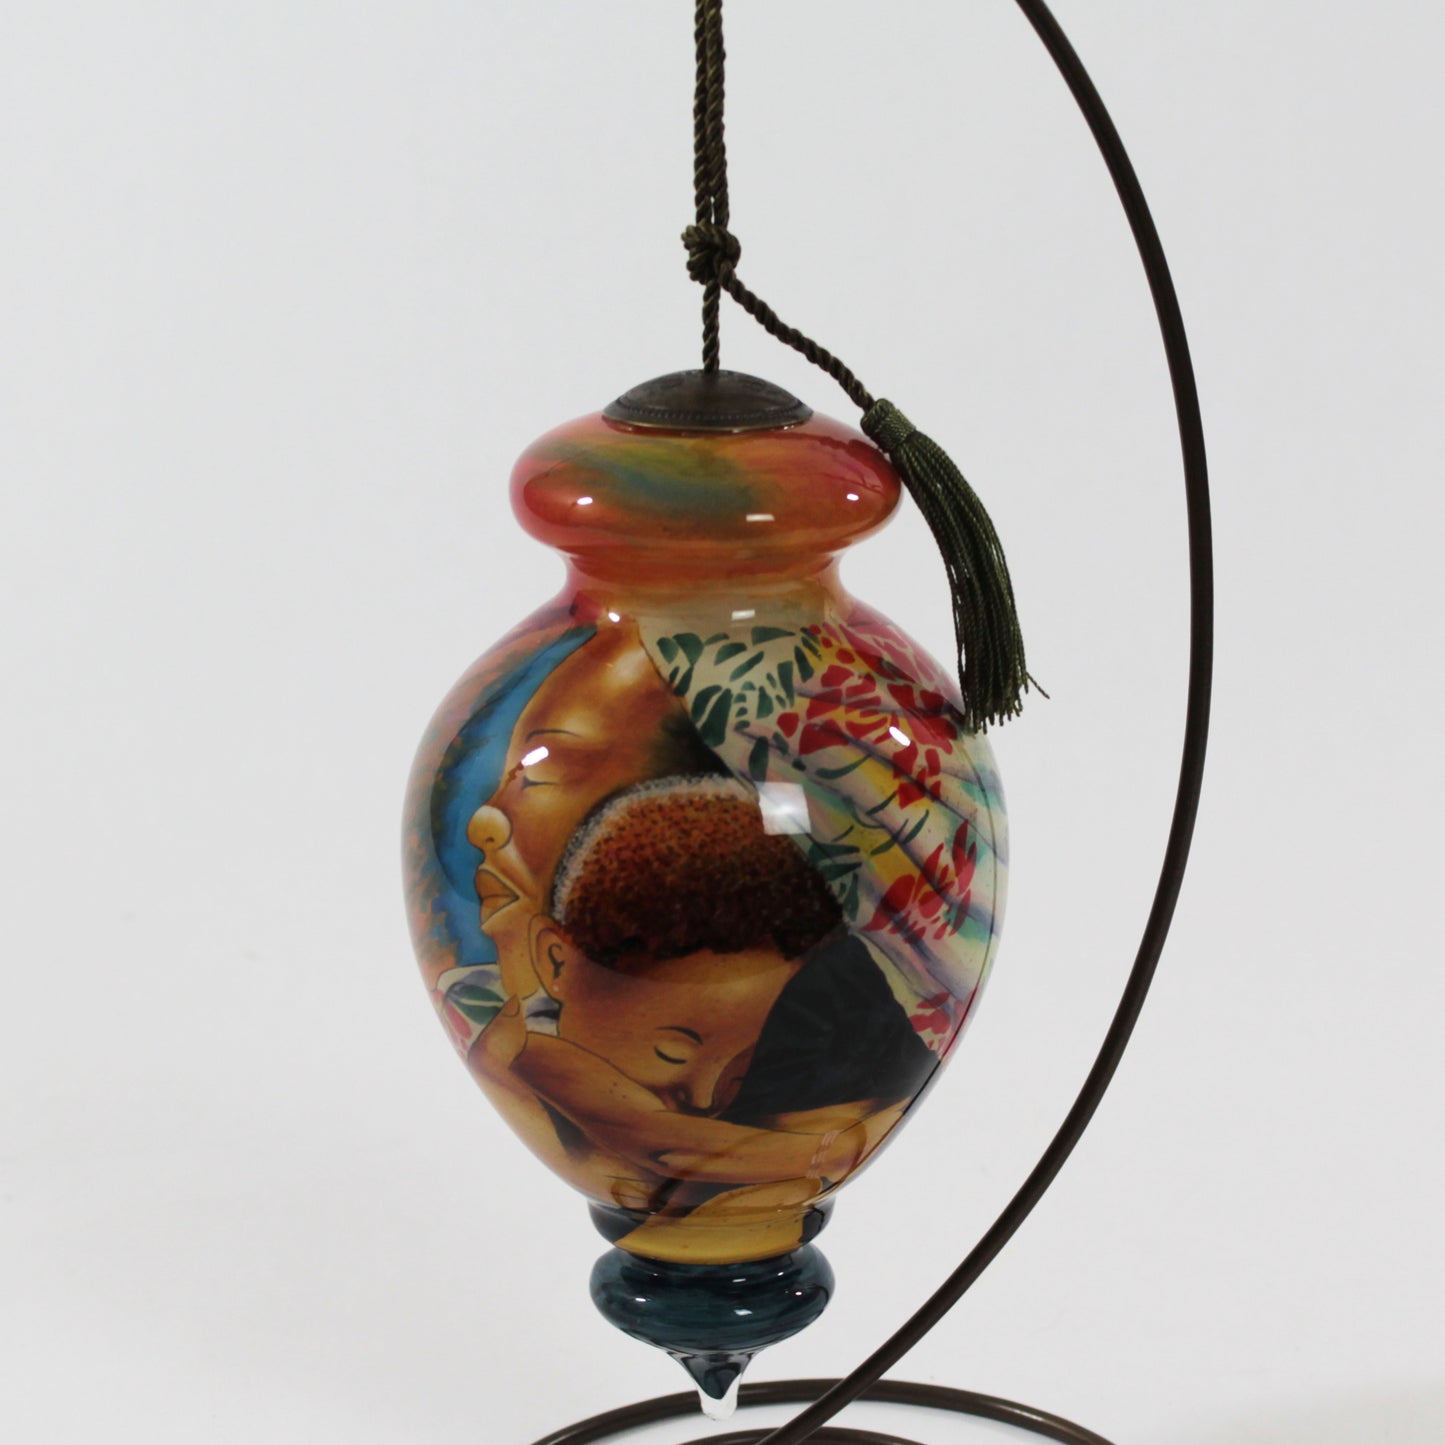 In Mothers Hands NeQwa Art Glass Ornament art by Keith Mallett hanging